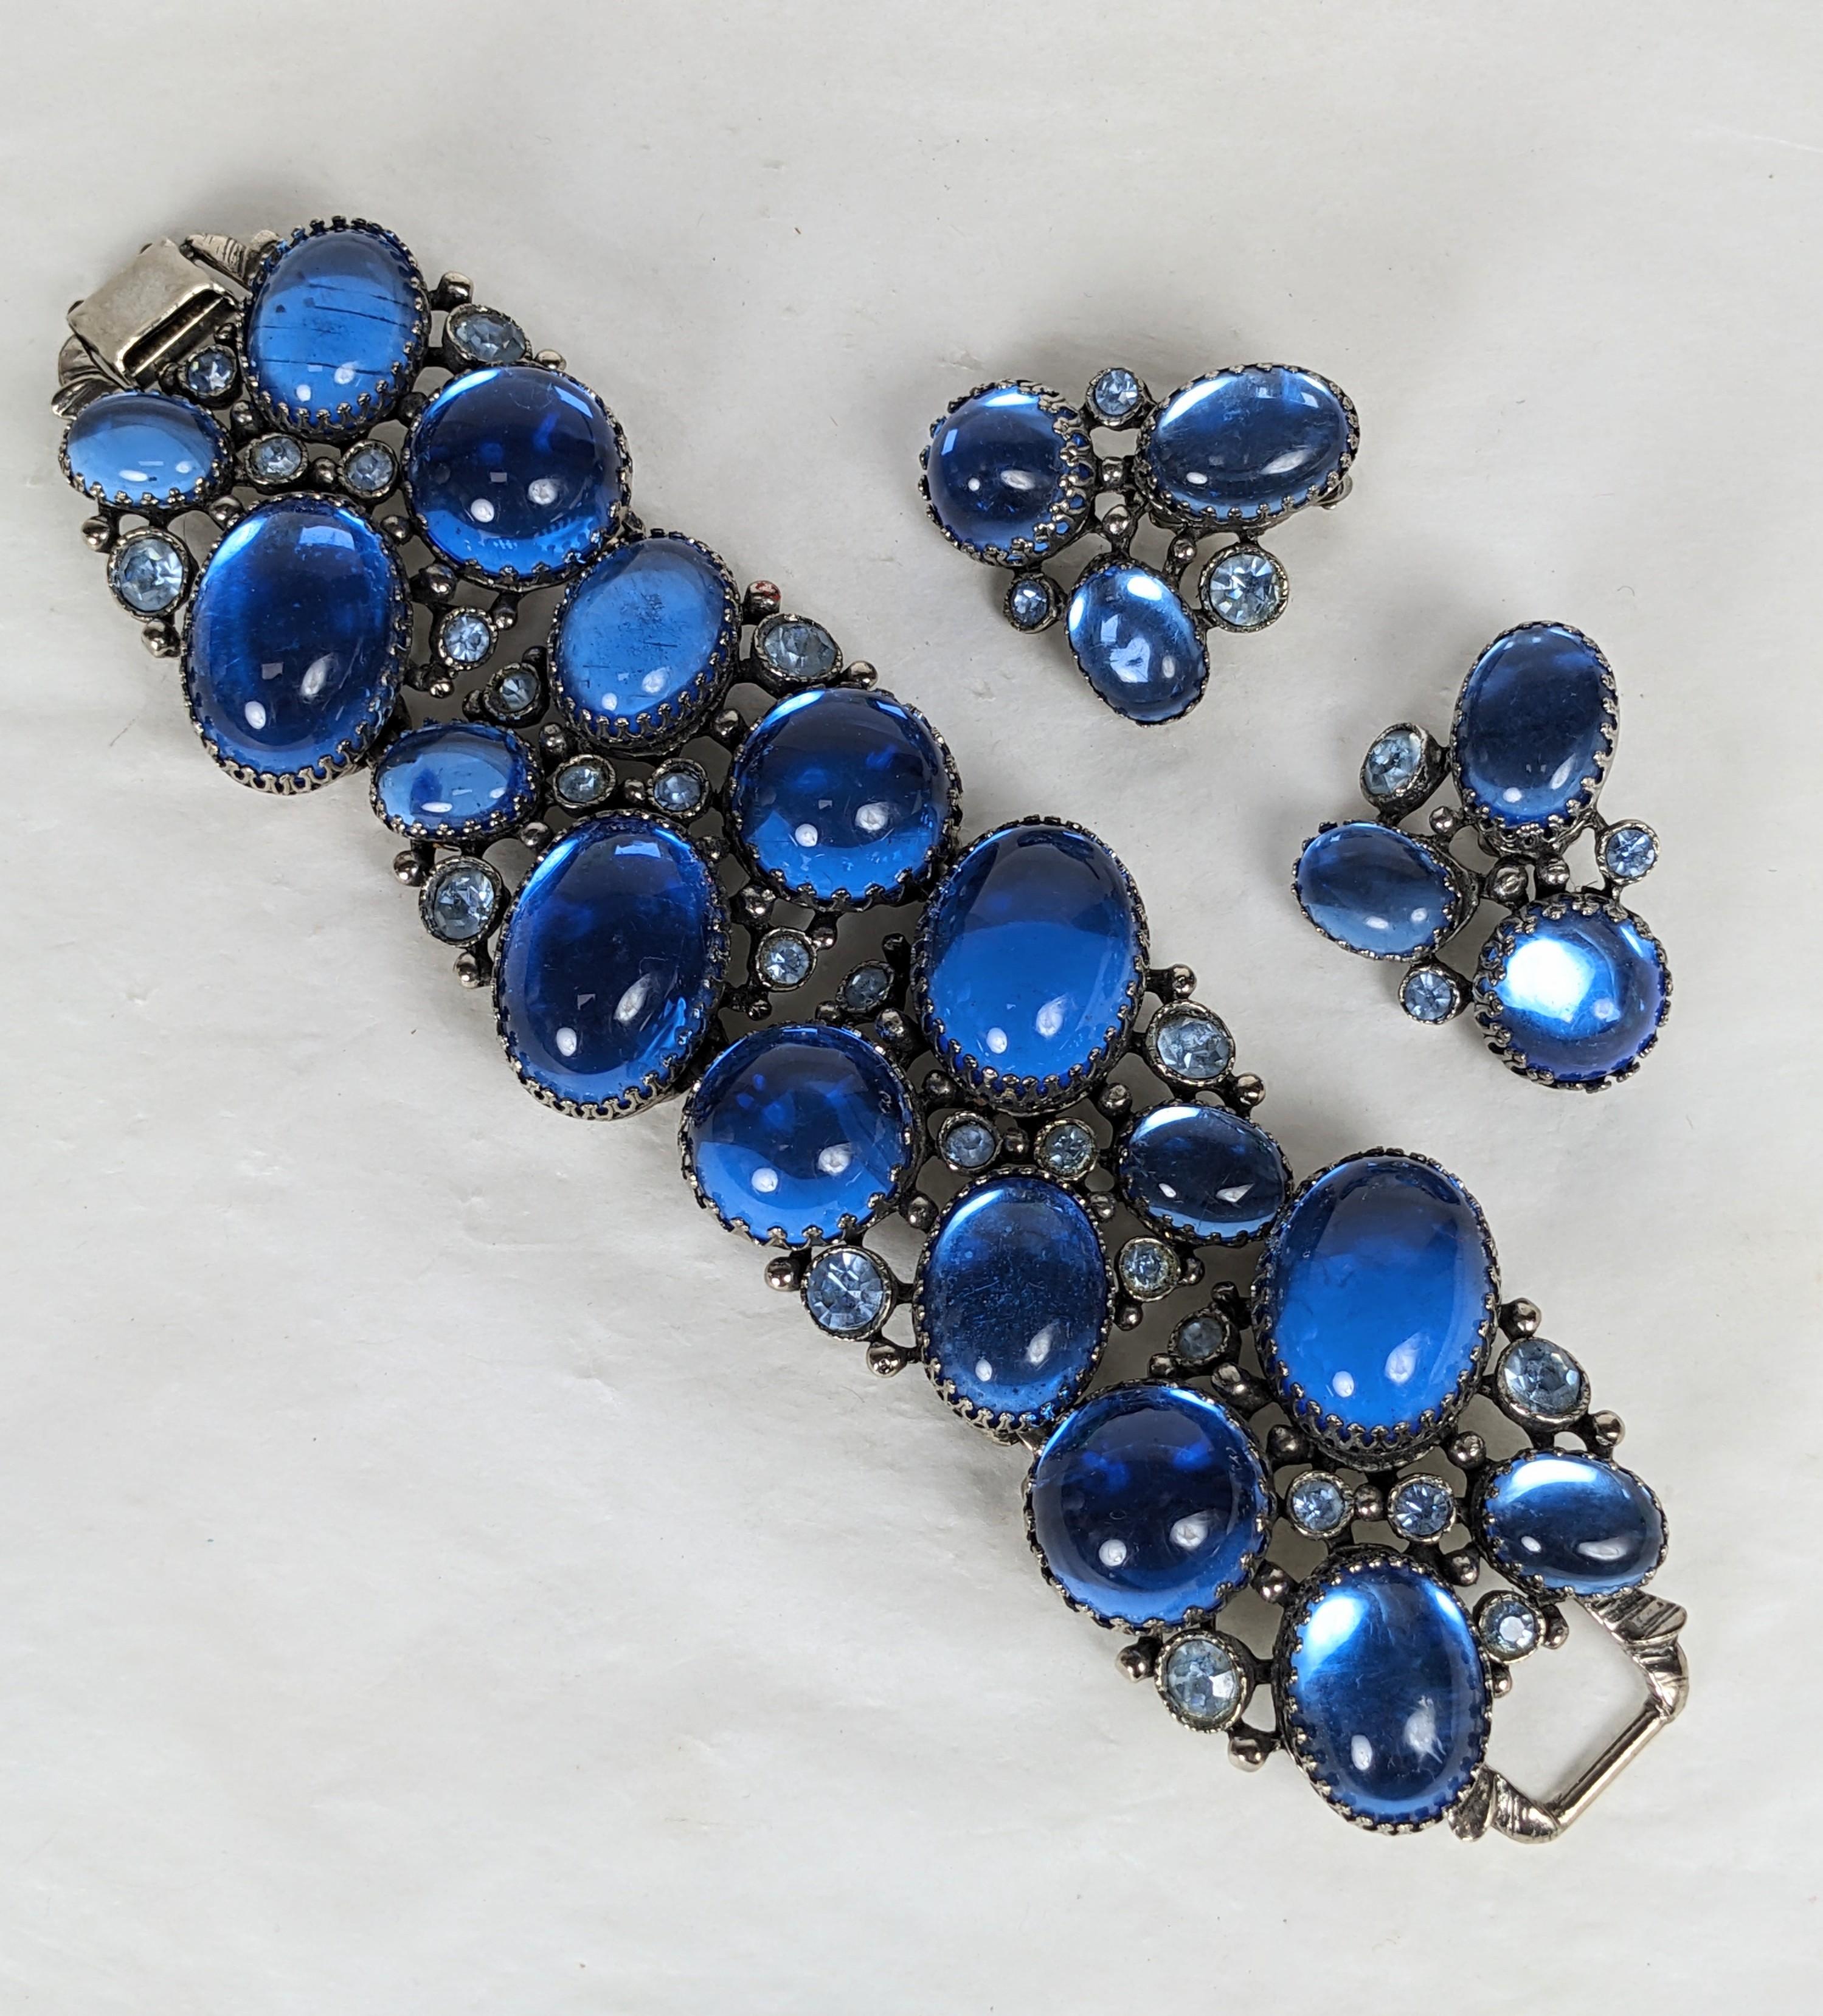 Striking Blue Cabochon Jeweled Suite with massive cuff and earrings from the 1950's. Schiaparelli style large foiled cabs are mixed with faceted crystals. Amazing scale, 7.5